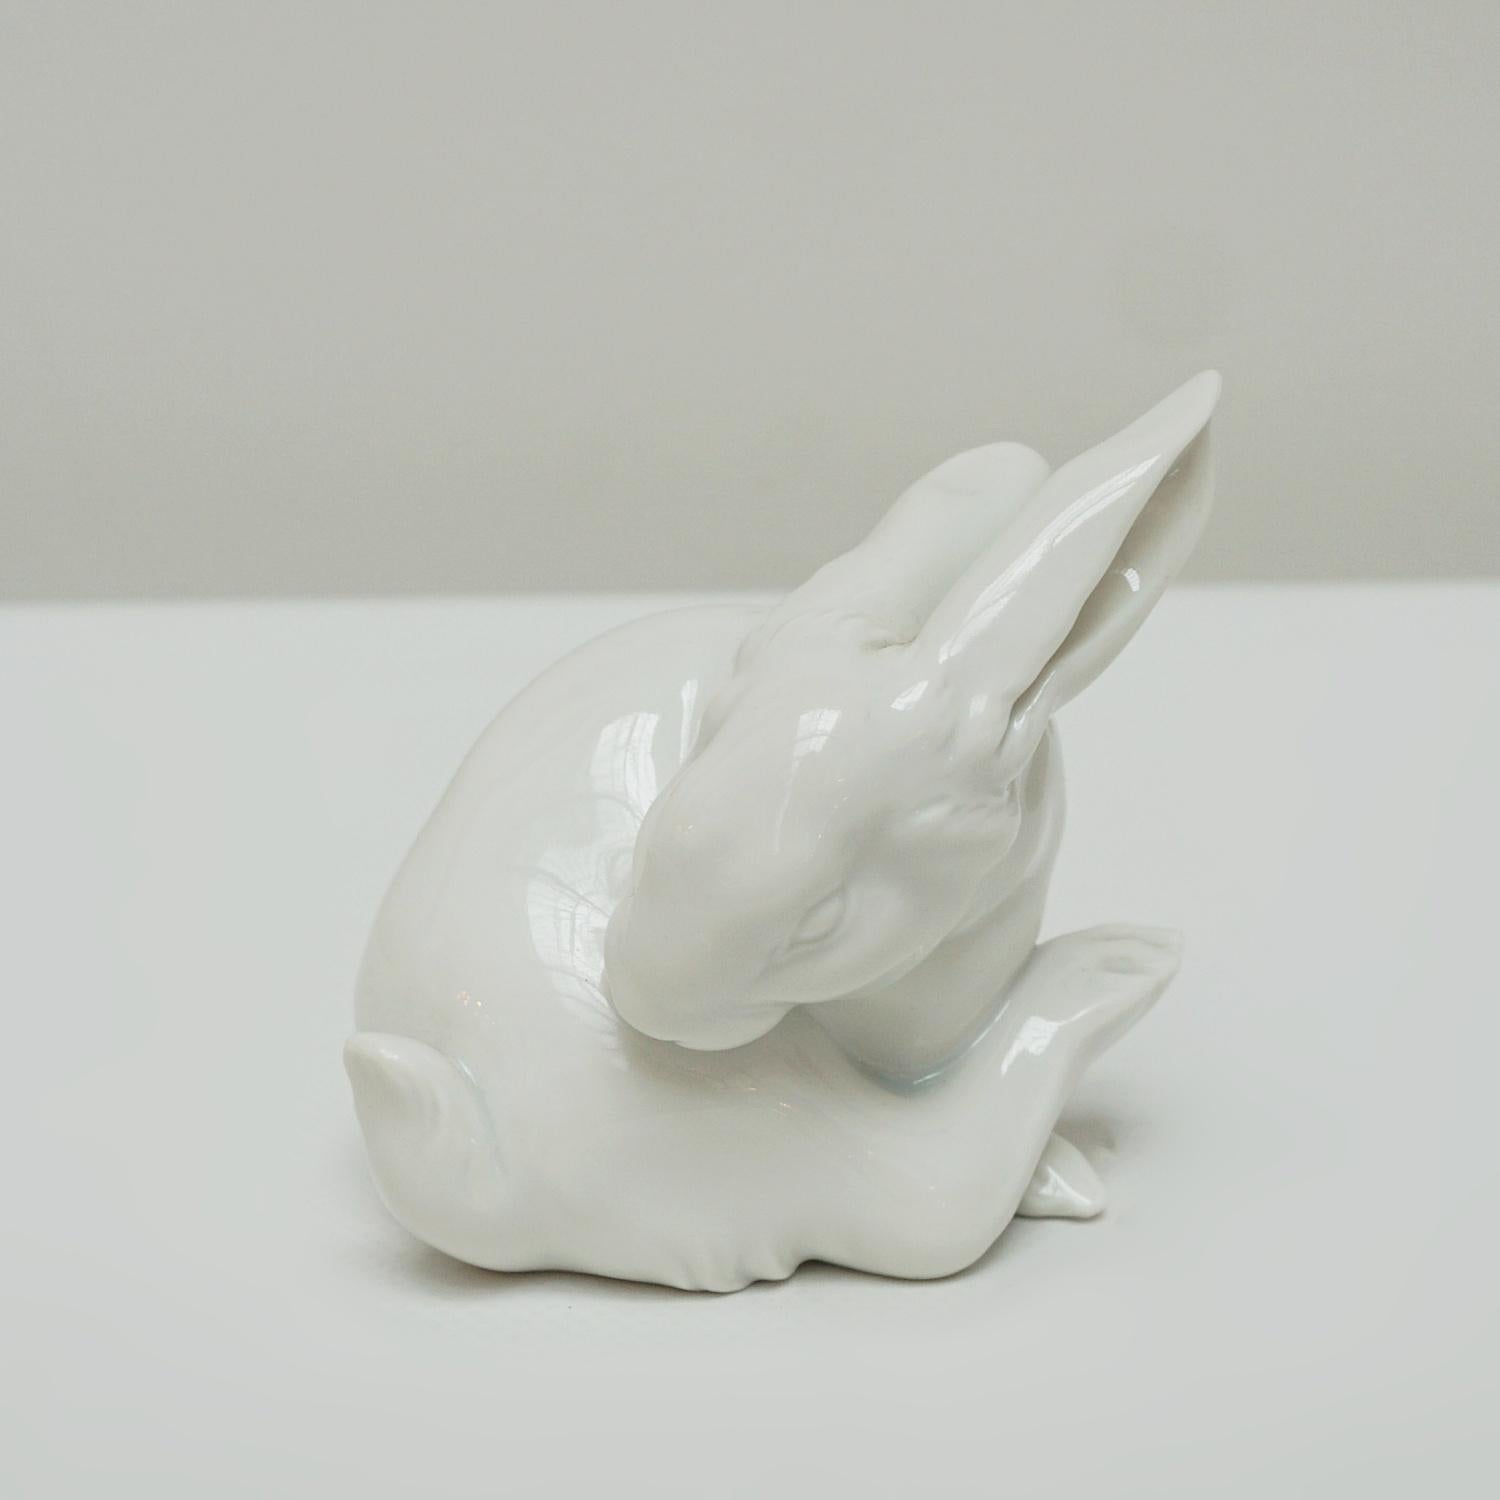 A porcelain figure of a rabbit preening itself. Manufactured by the Augarten Porcelain Manufactory in Vienna. Marked, numbered and dated to underside.

Origin: Austrian

Date: 1934

Item Number: 0707231